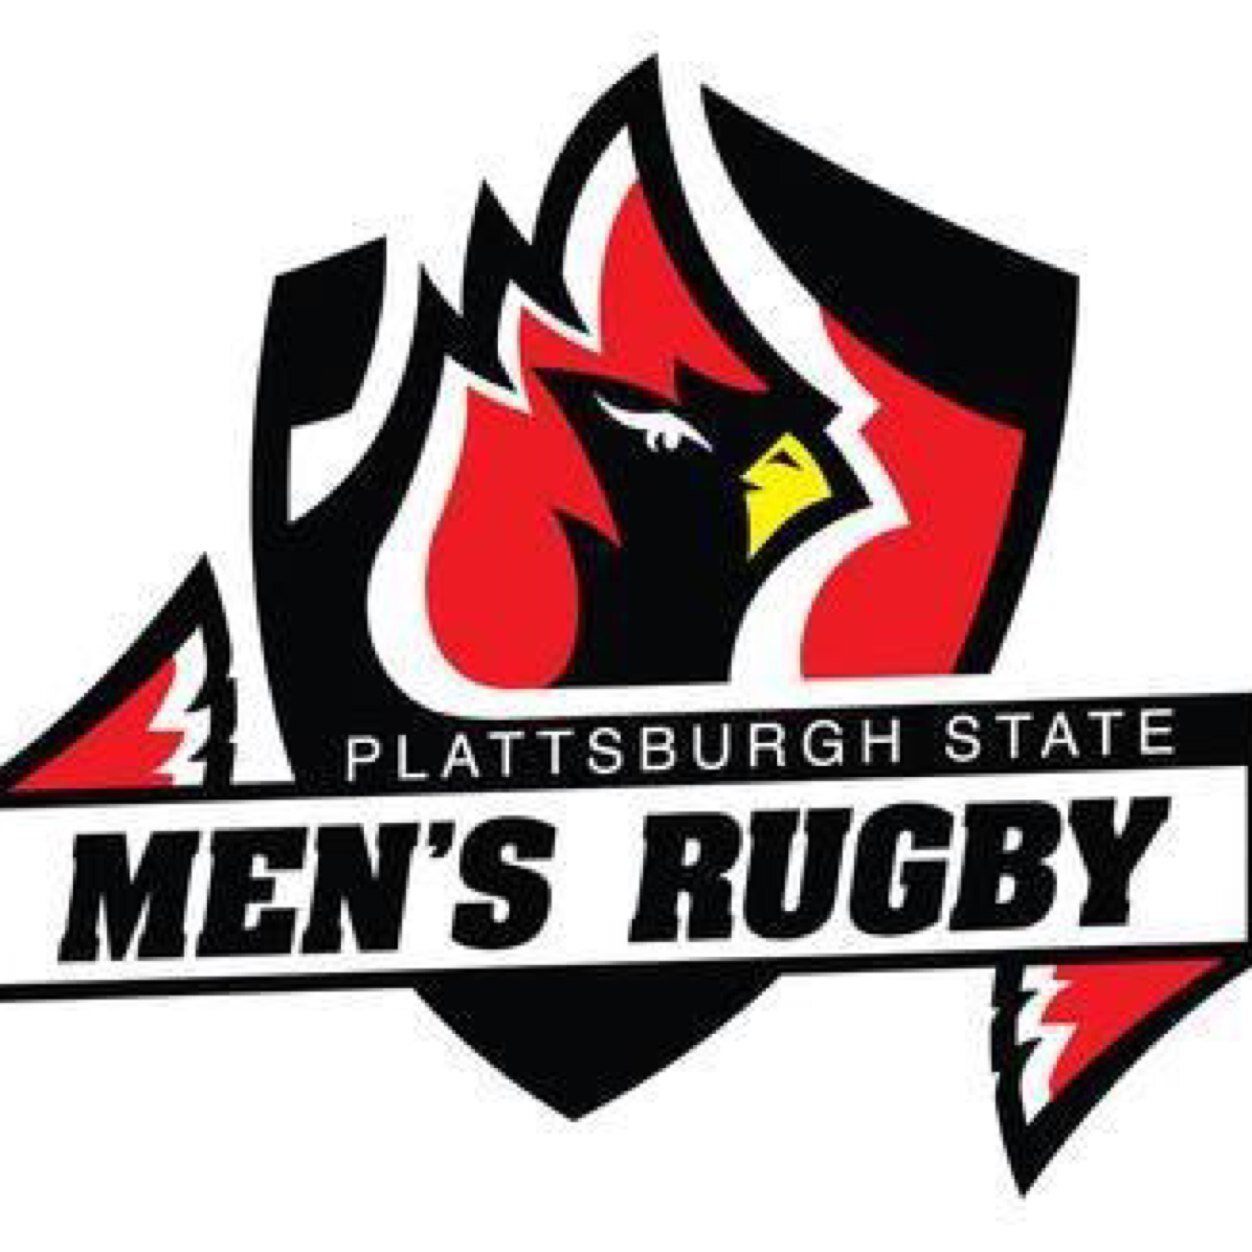 The Official Twitter of Plattsburgh State Men's Rugby team. #PlattsRugby